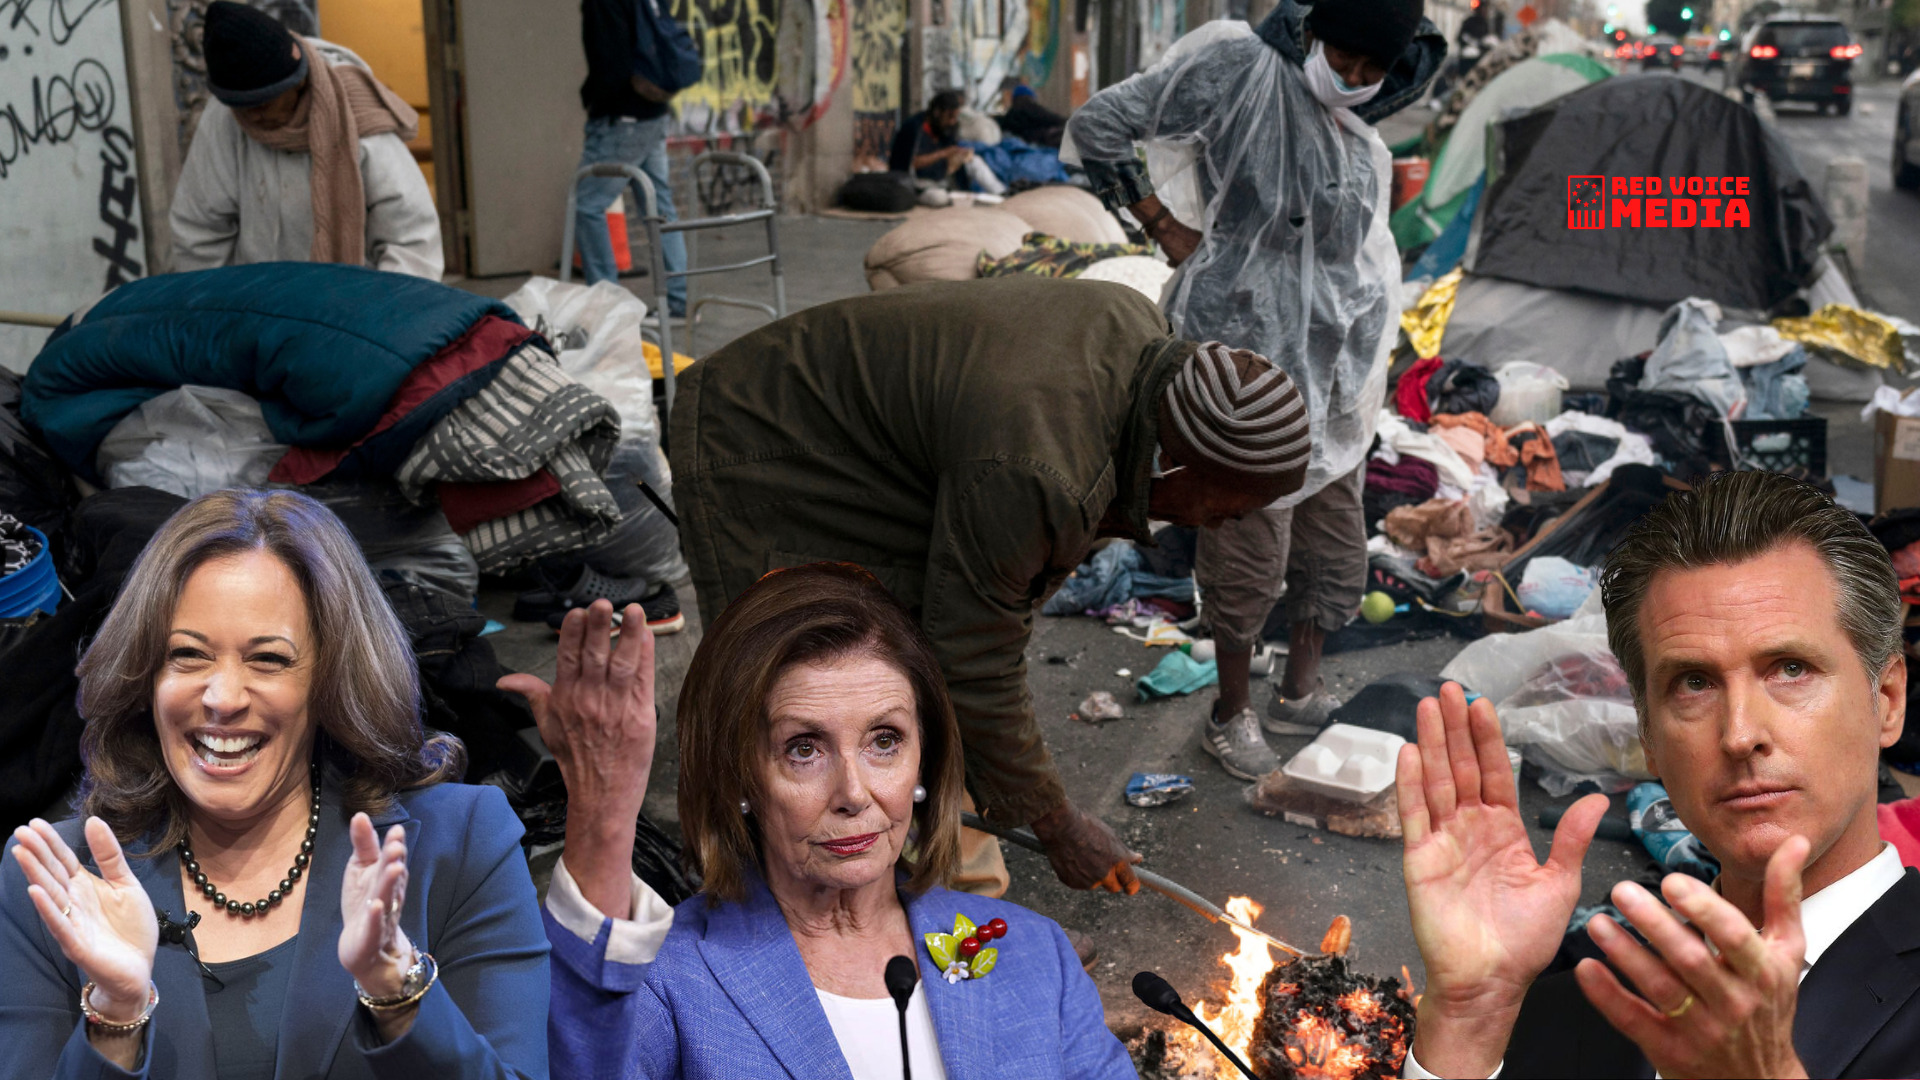 Pelosi federal construction workers told to stay home by dangerous crime wave [VIDEOS]